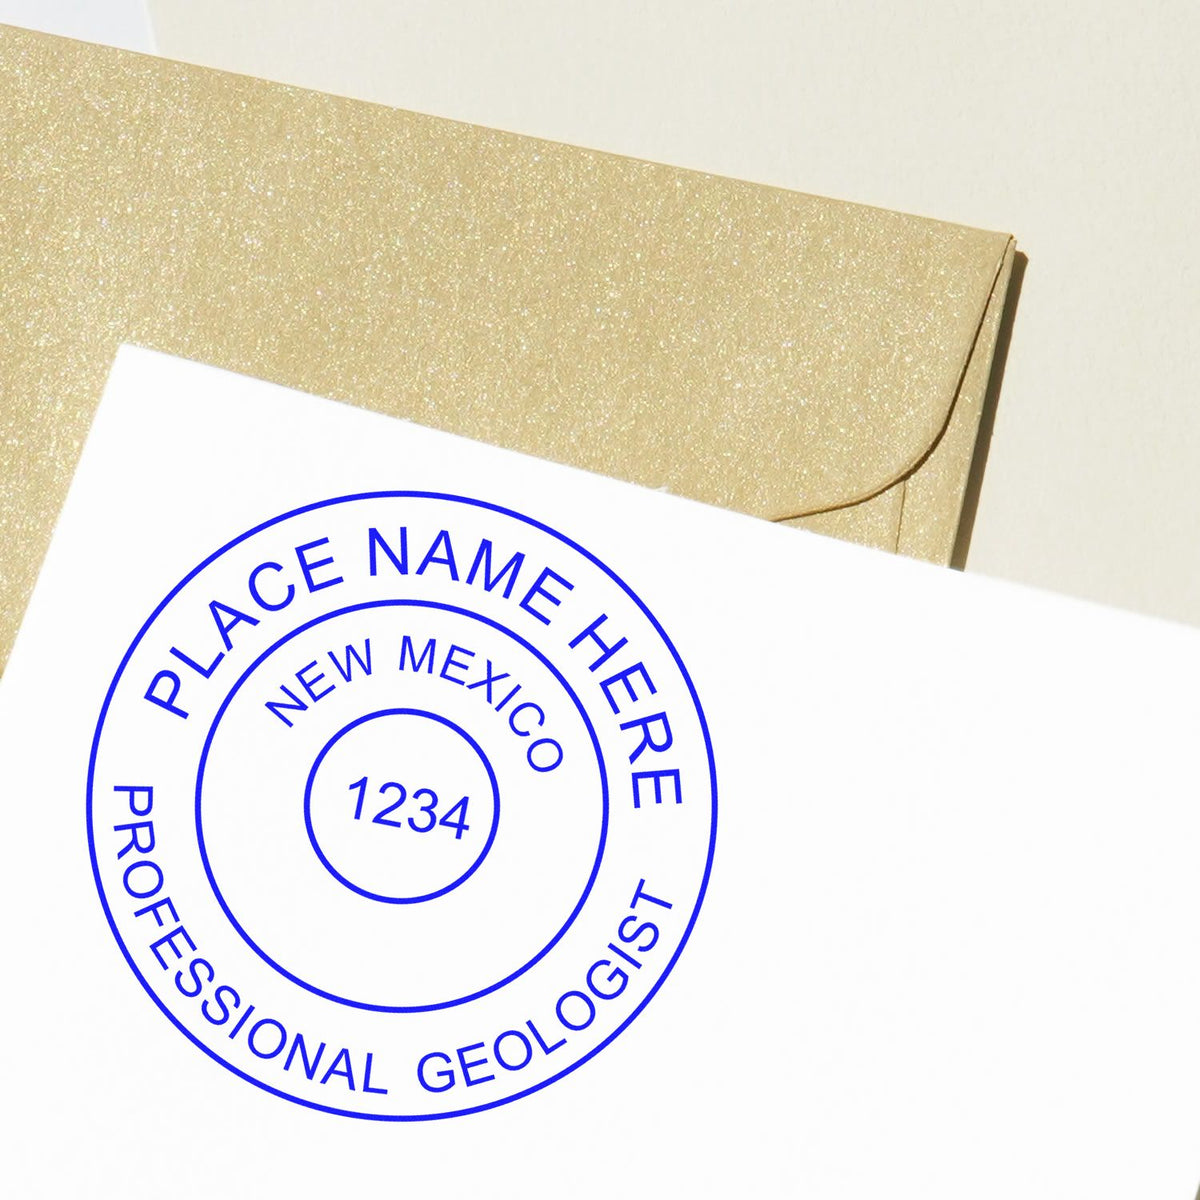 An alternative view of the New Mexico Professional Geologist Seal Stamp stamped on a sheet of paper showing the image in use